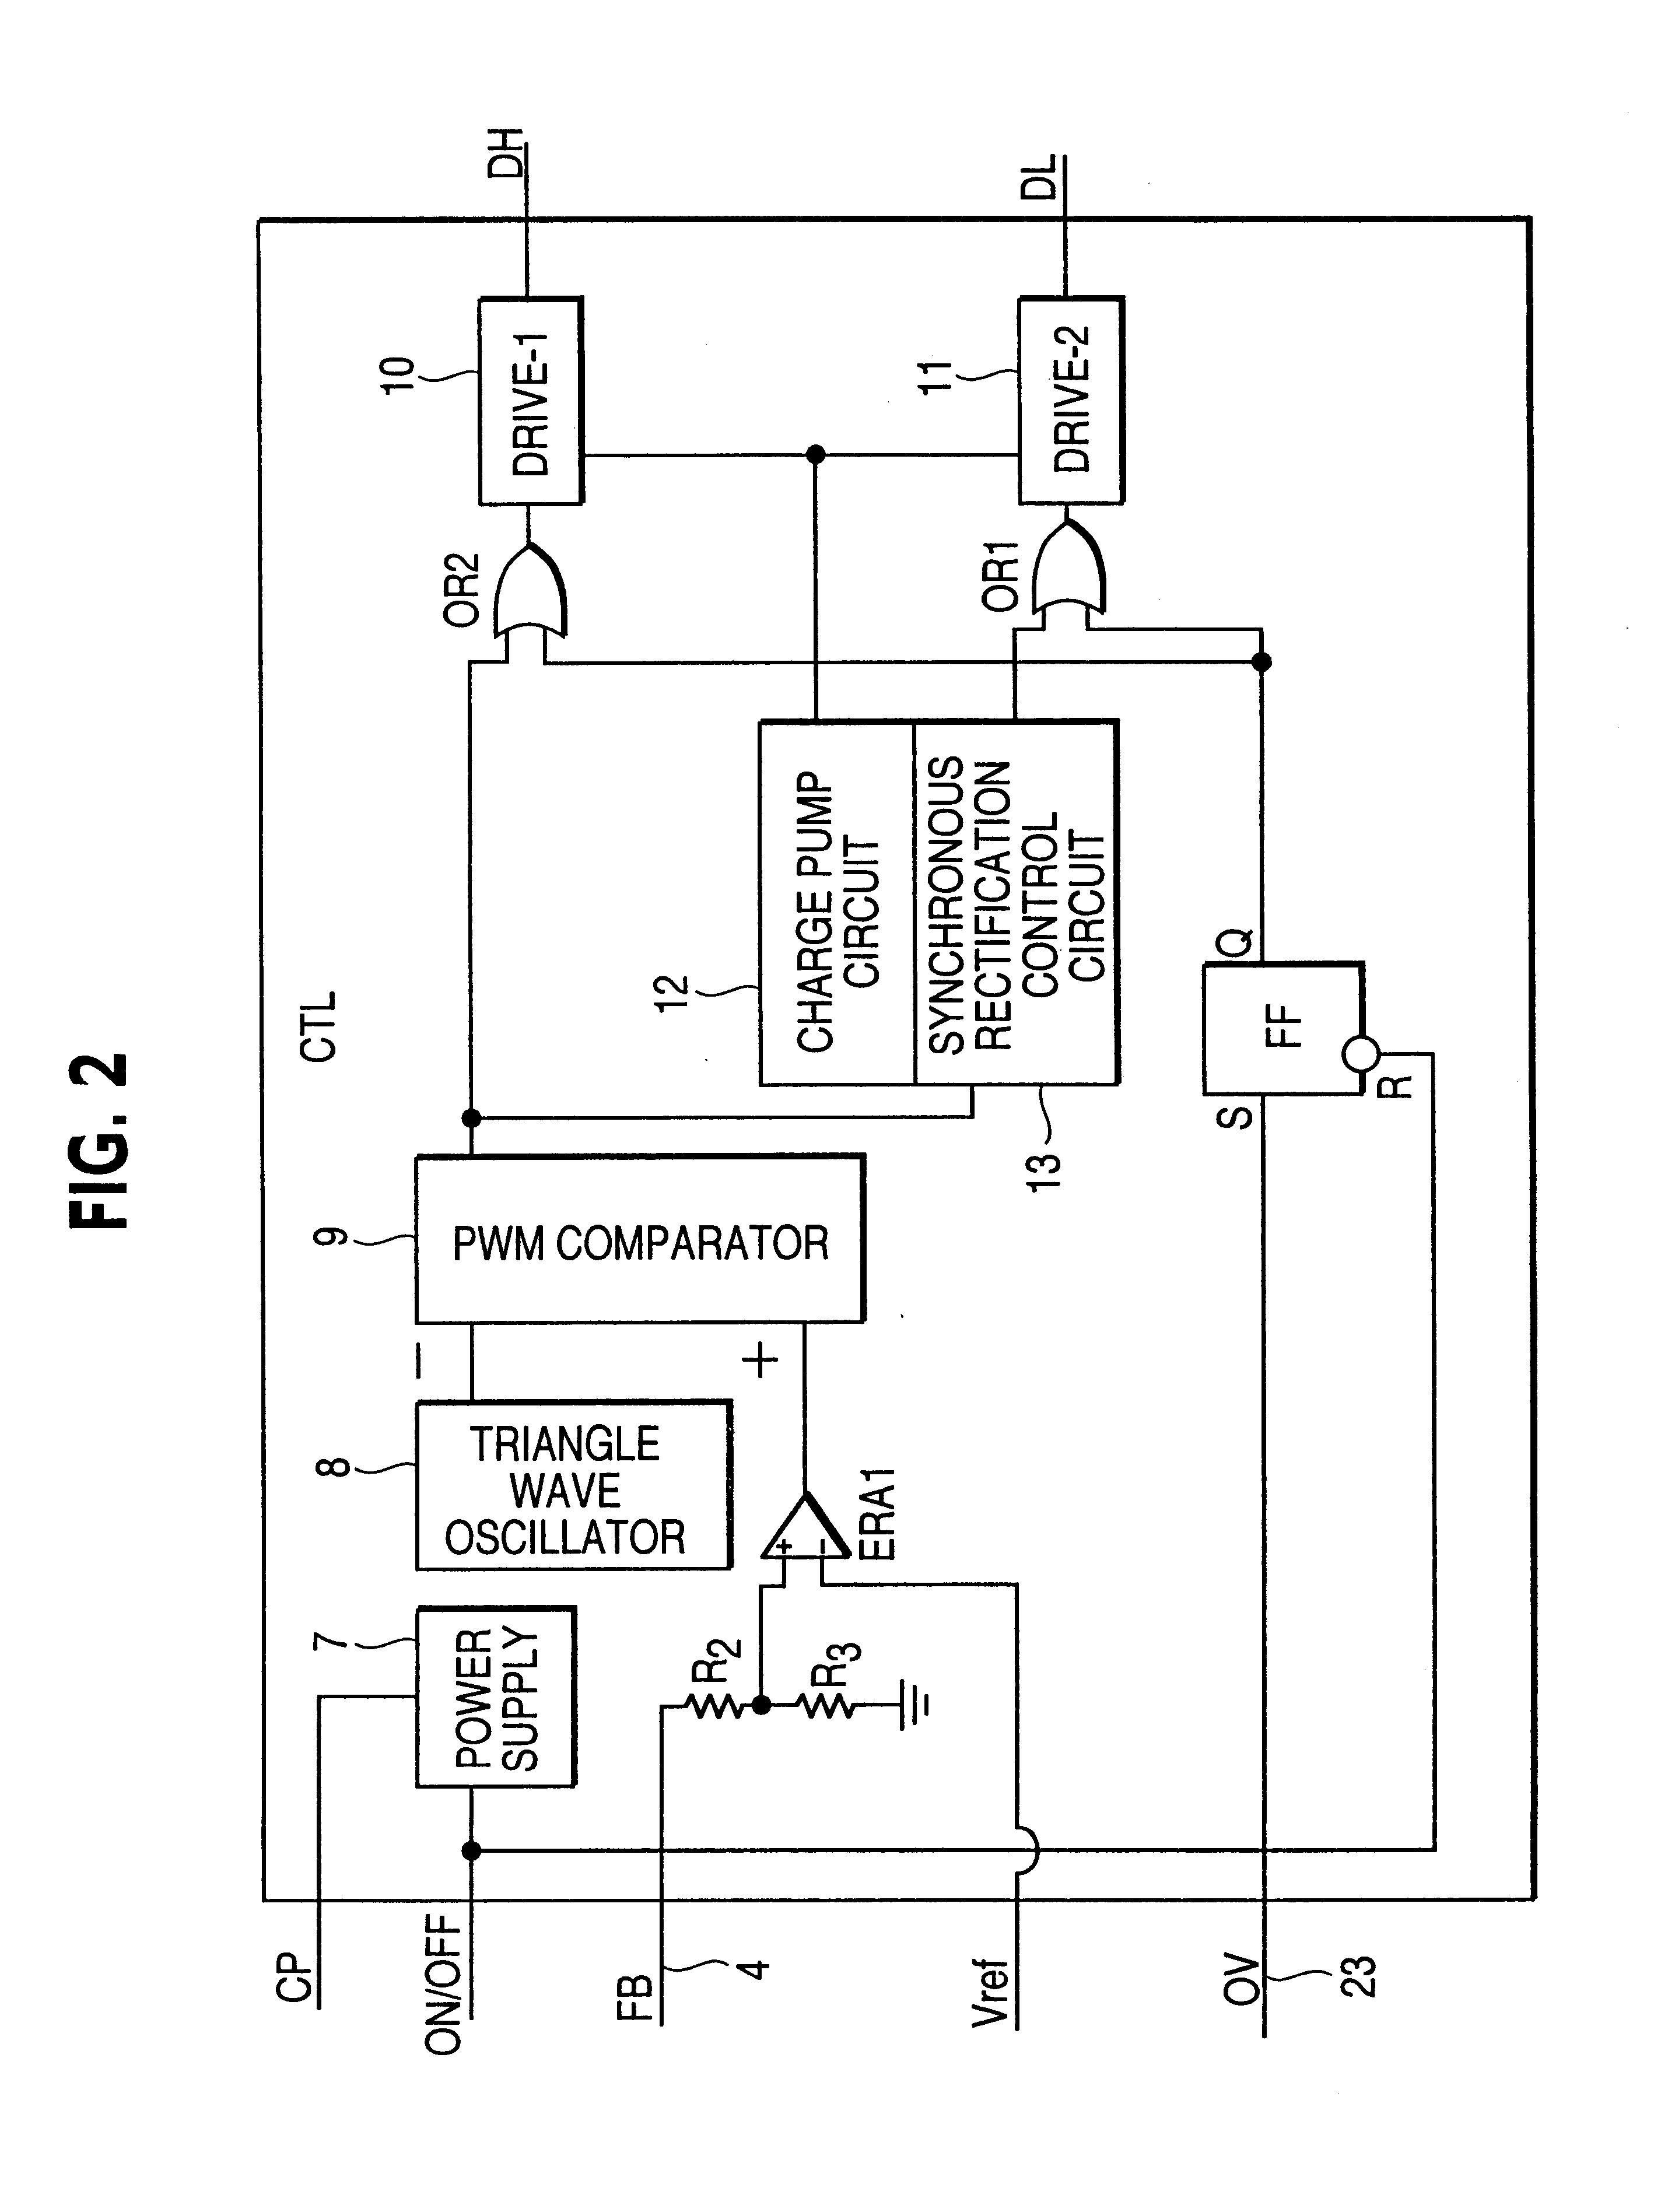 DC-to-DC converter capable of preventing overvoltage